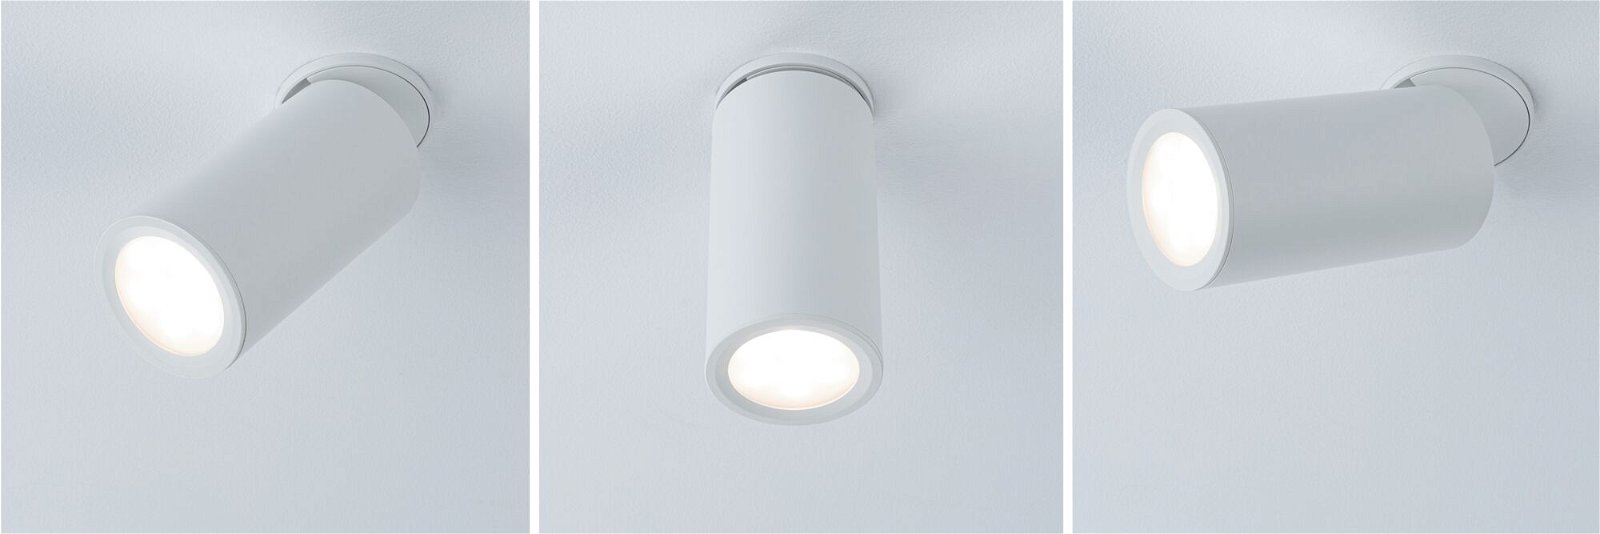 LED Recessed luminaire 3-Step-Dim Turnal round 60mm 90° Coin 6W 470lm 230V dimmable 2700K Matt white